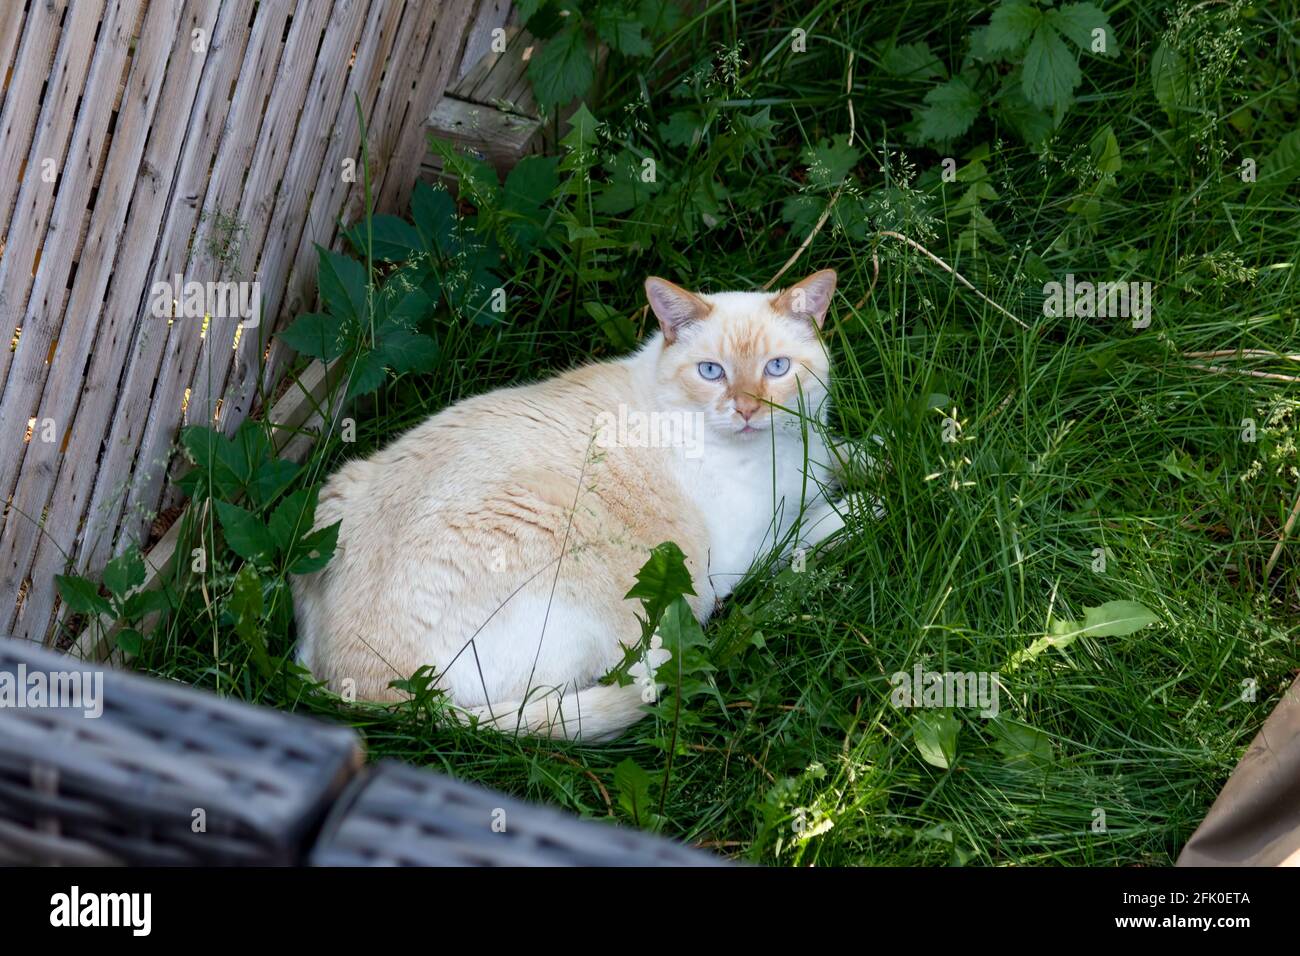 A light coloured cat with bright blue eyes lounging in grass and claiming a neighbour's yard as its own Stock Photo